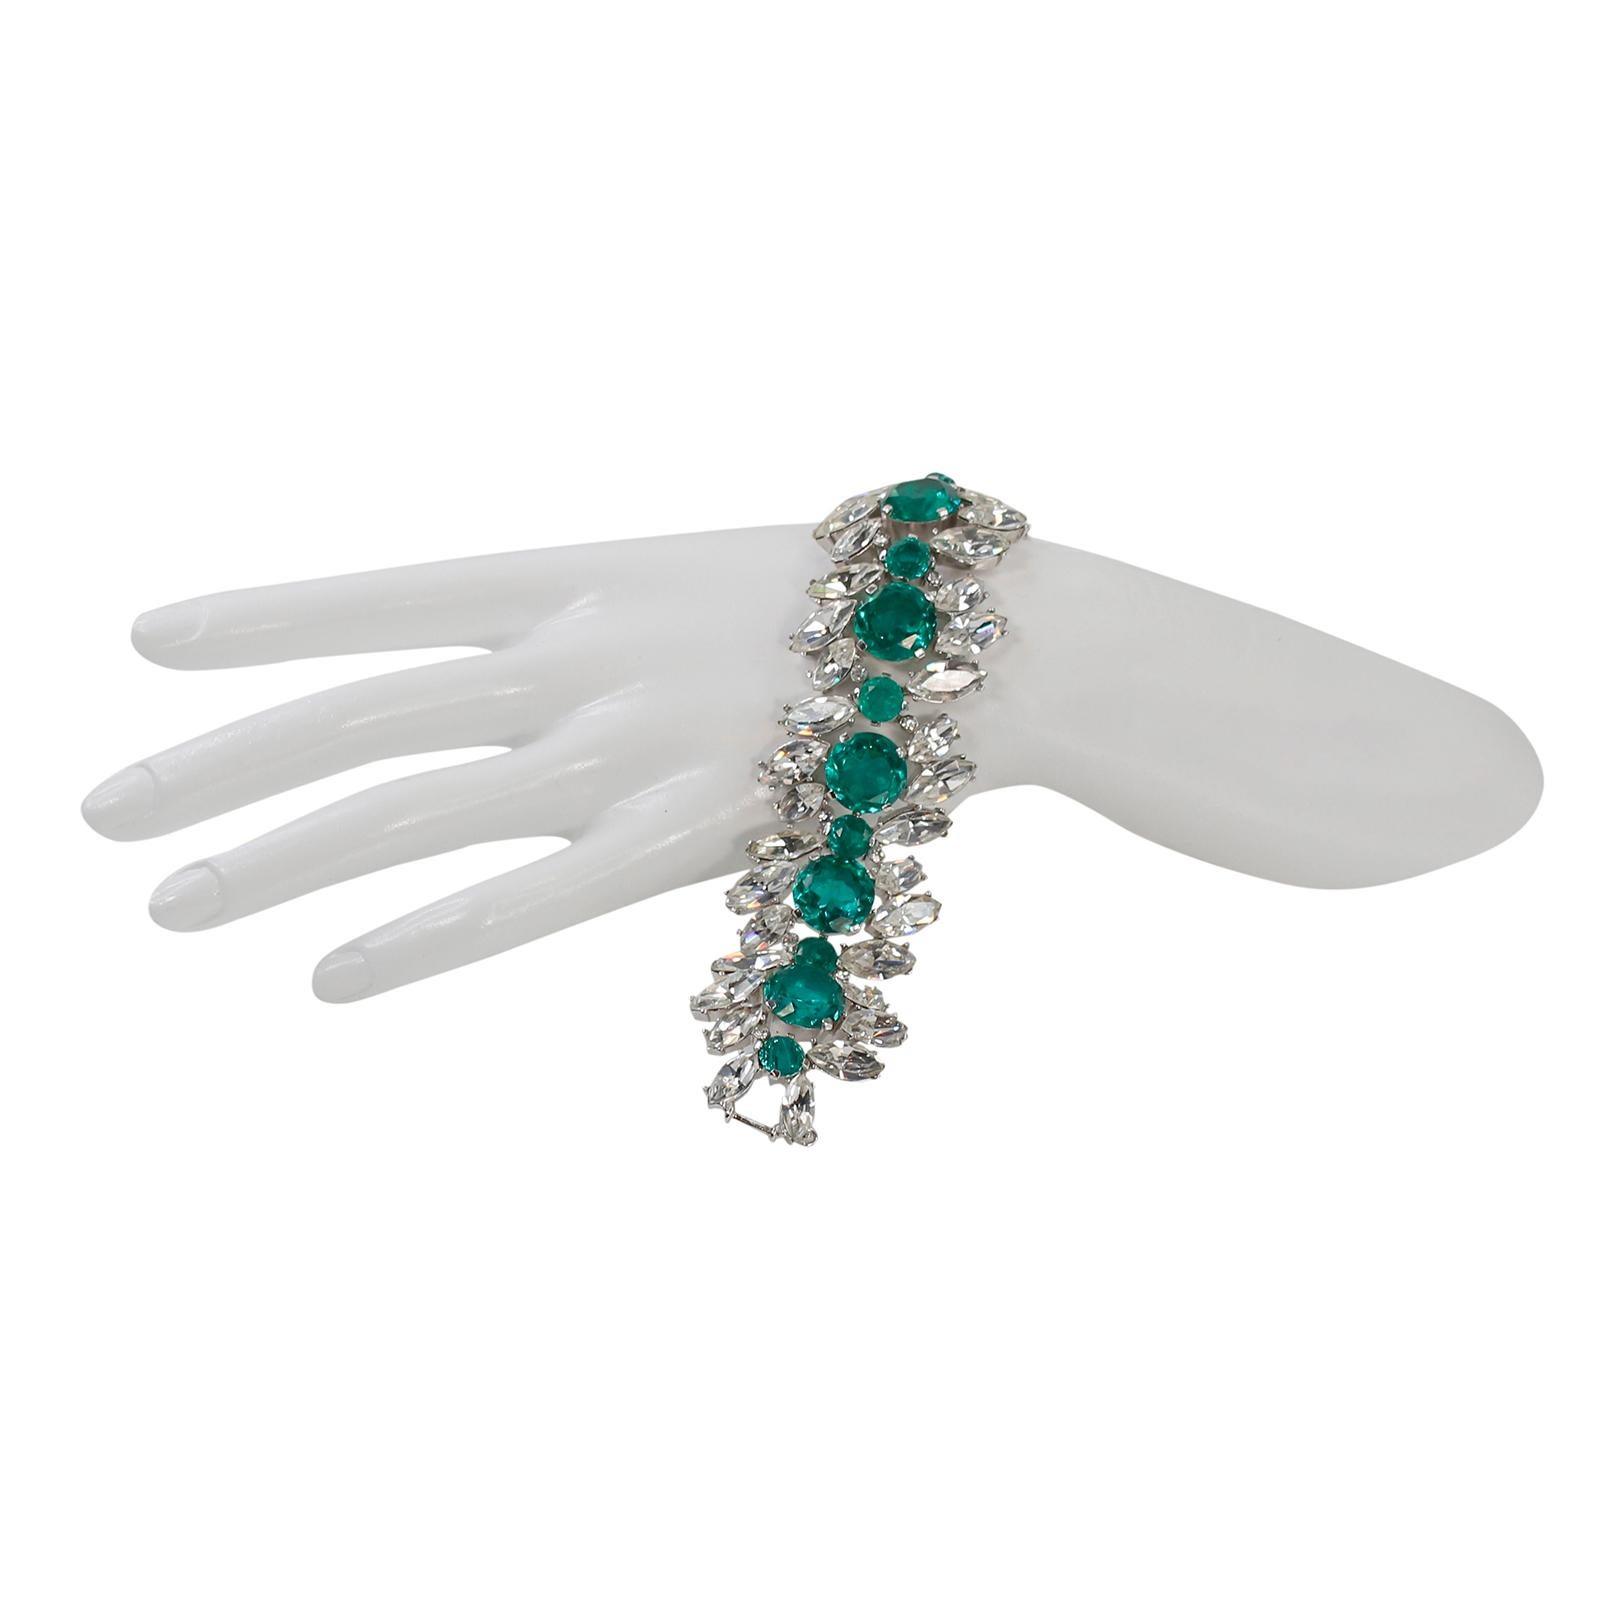 Vintage Trifari Emerald Green and Crystal Bracelet Circa 1960s In Good Condition For Sale In New York, NY